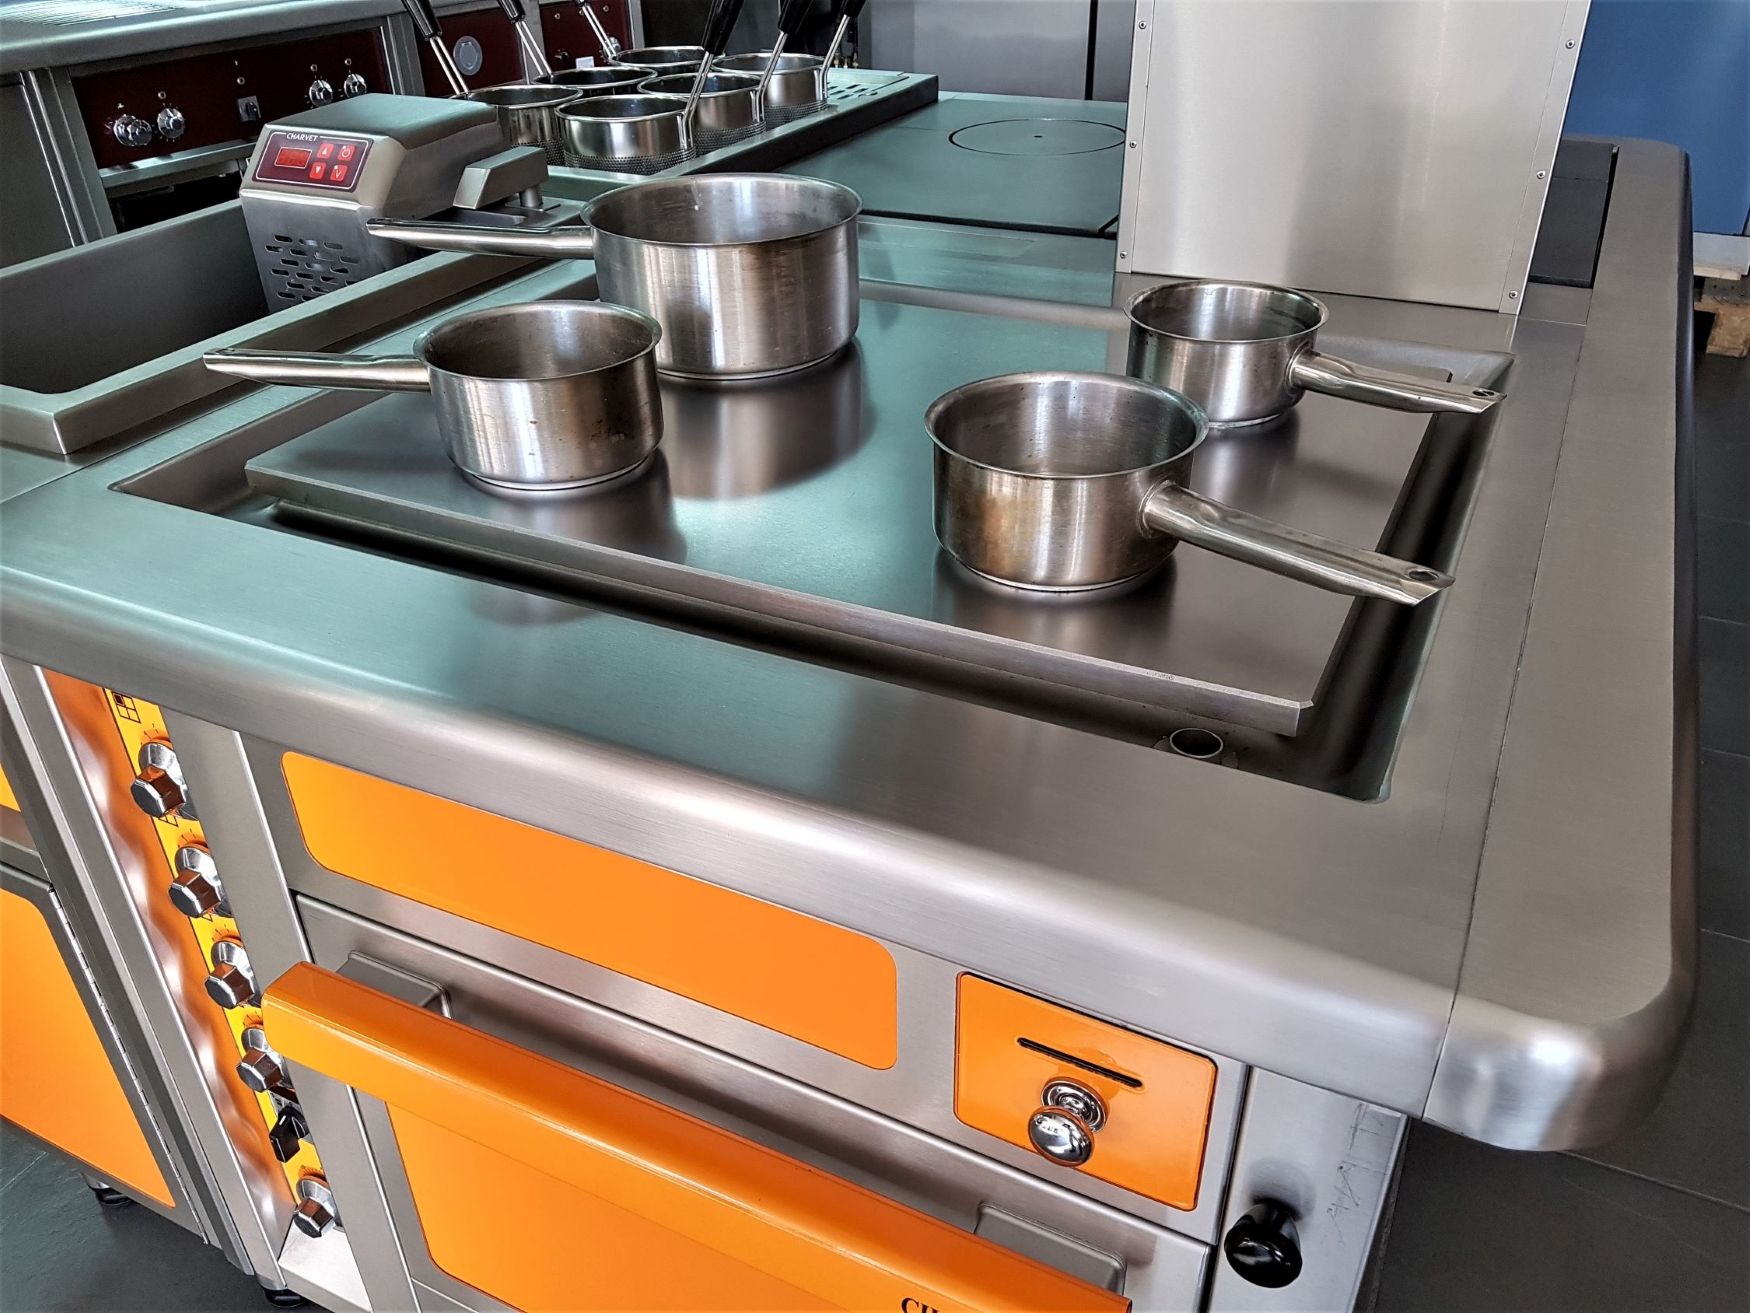 Multifunction by design: Charvet's Four Zone Steel Plancha